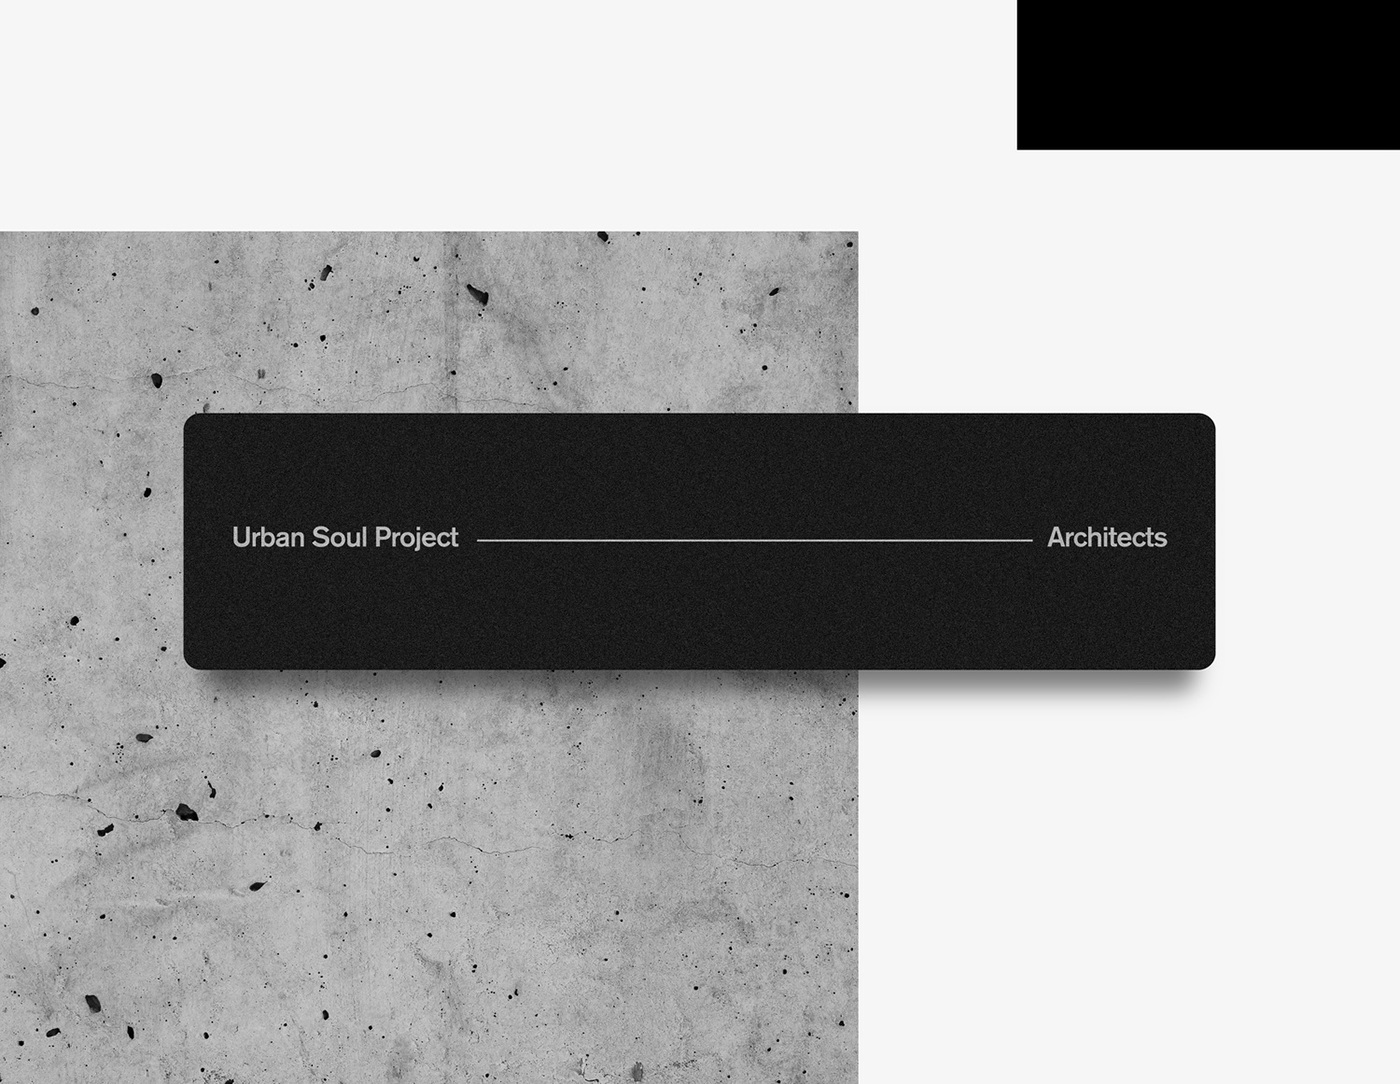 Form avantgarde black and white Corporate Identity visual system